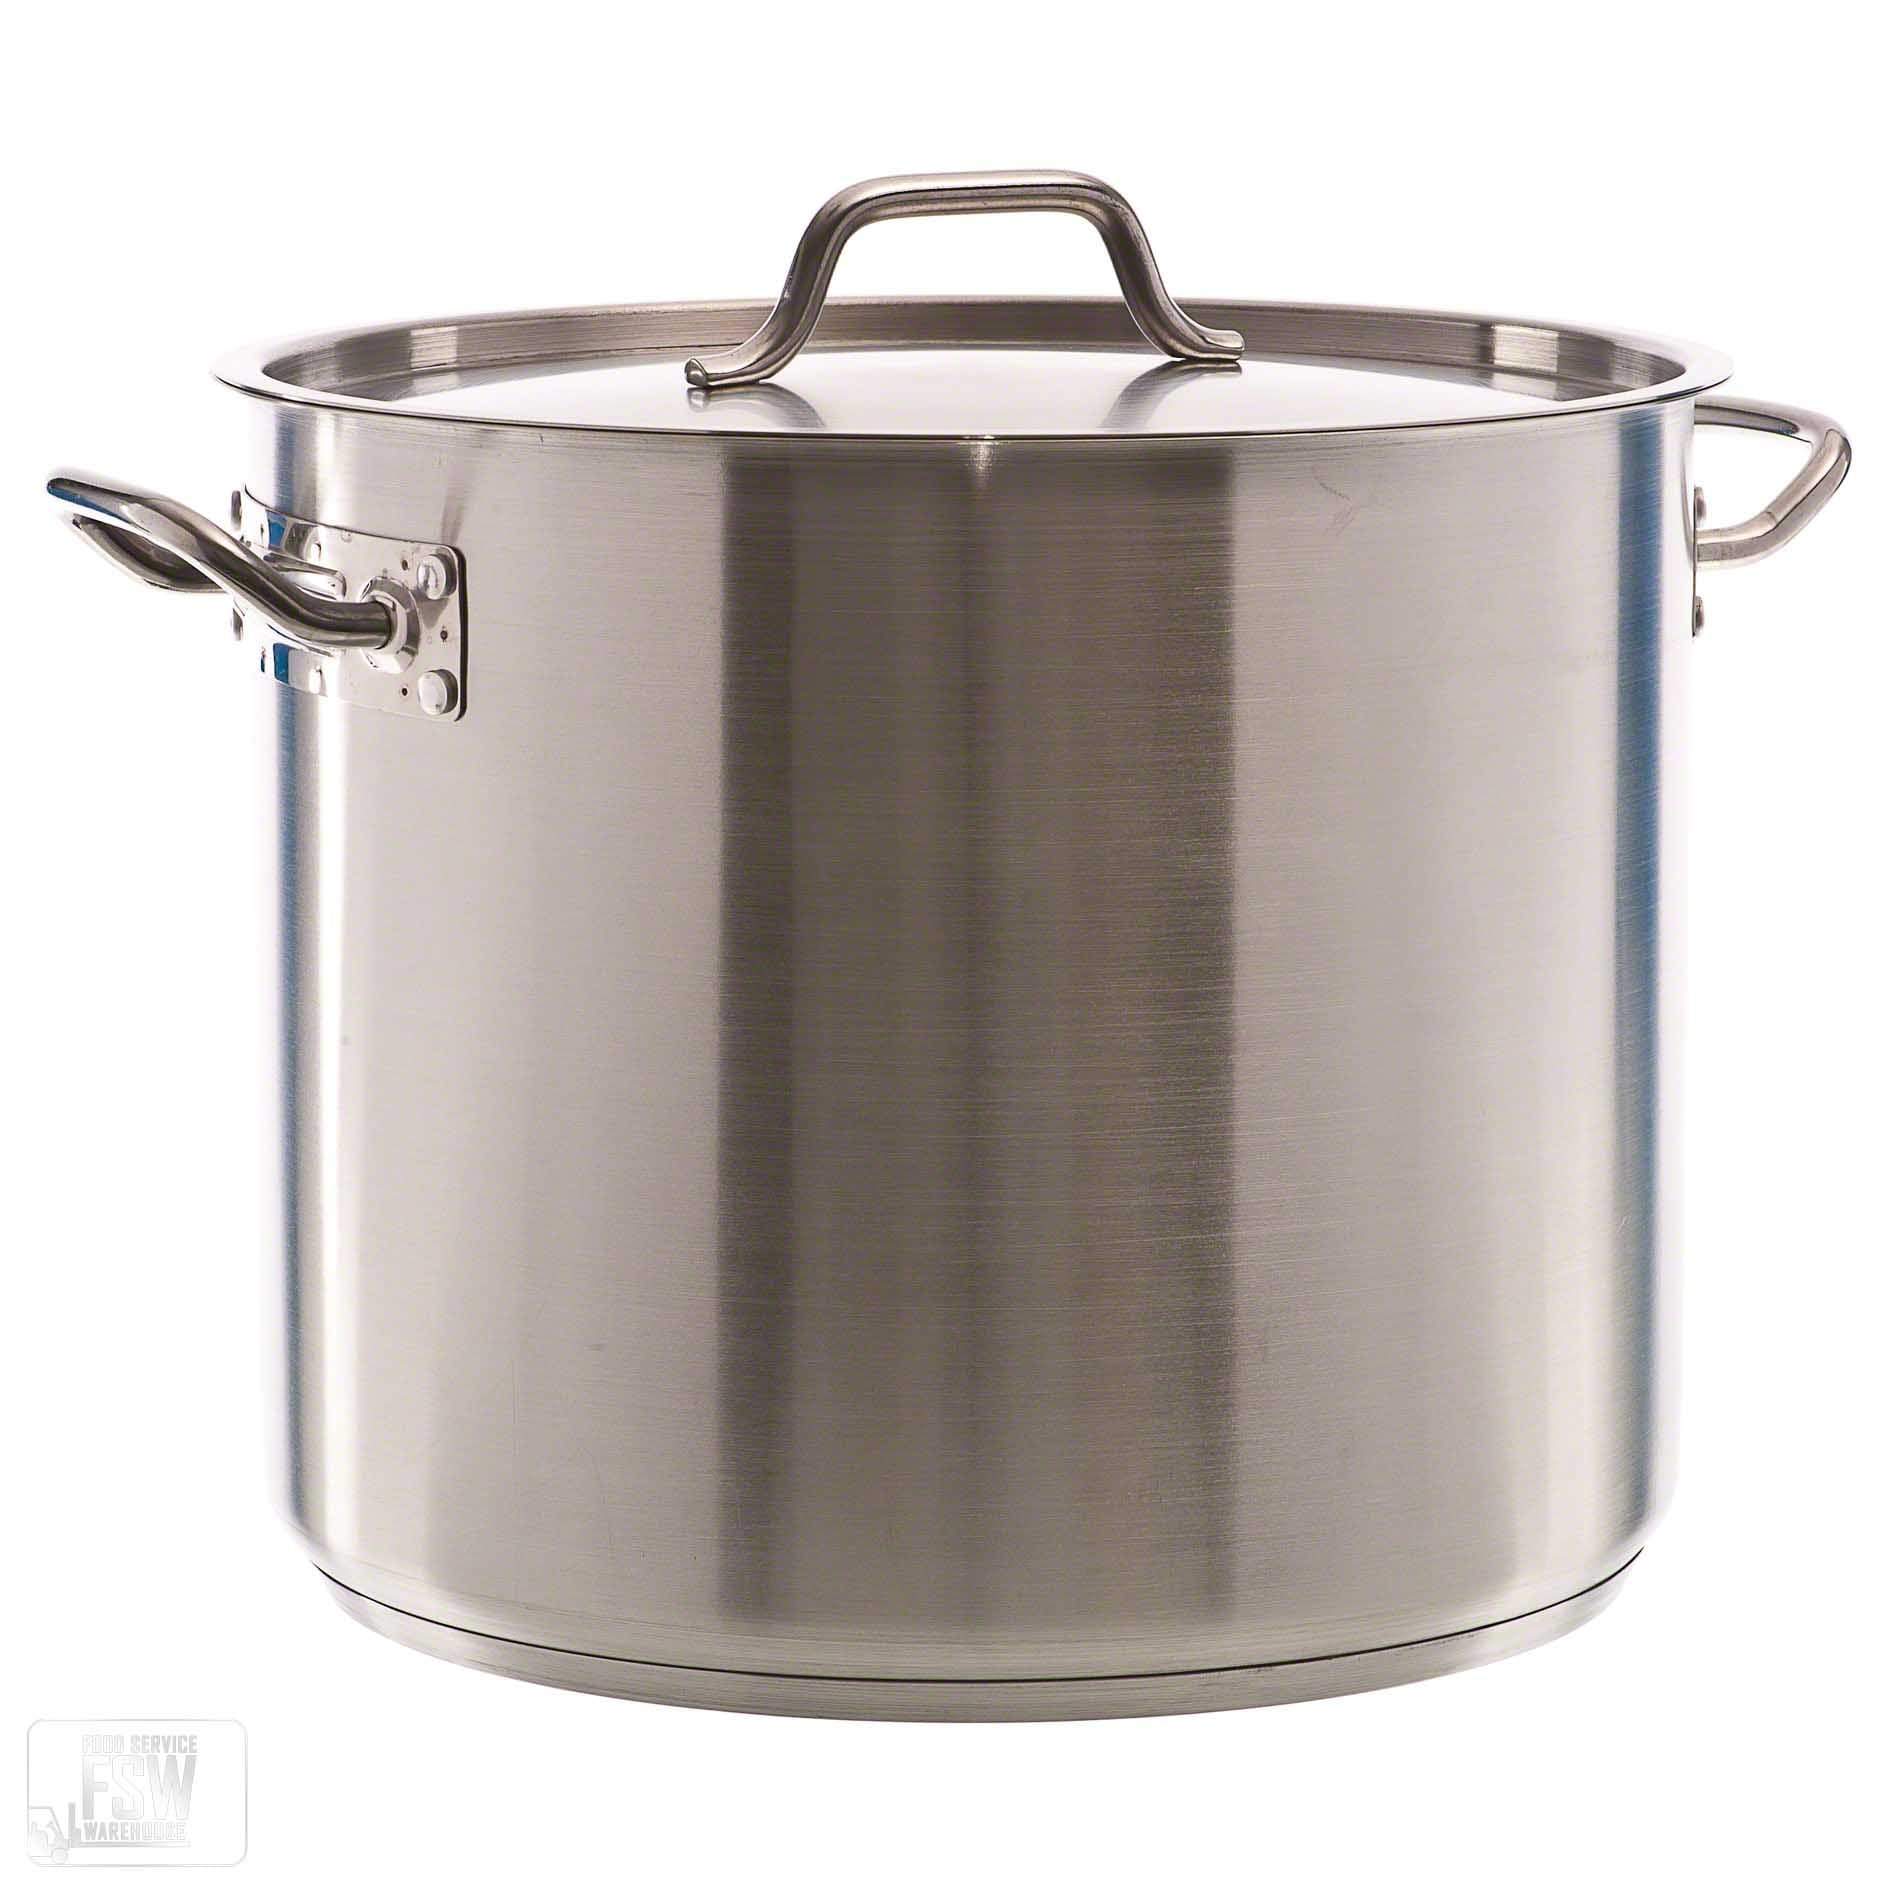 Stainless Steel 8-Qt Master Cook Stock Pot With Cover (5 mm aluminum core,  NSF) - LionsDeal